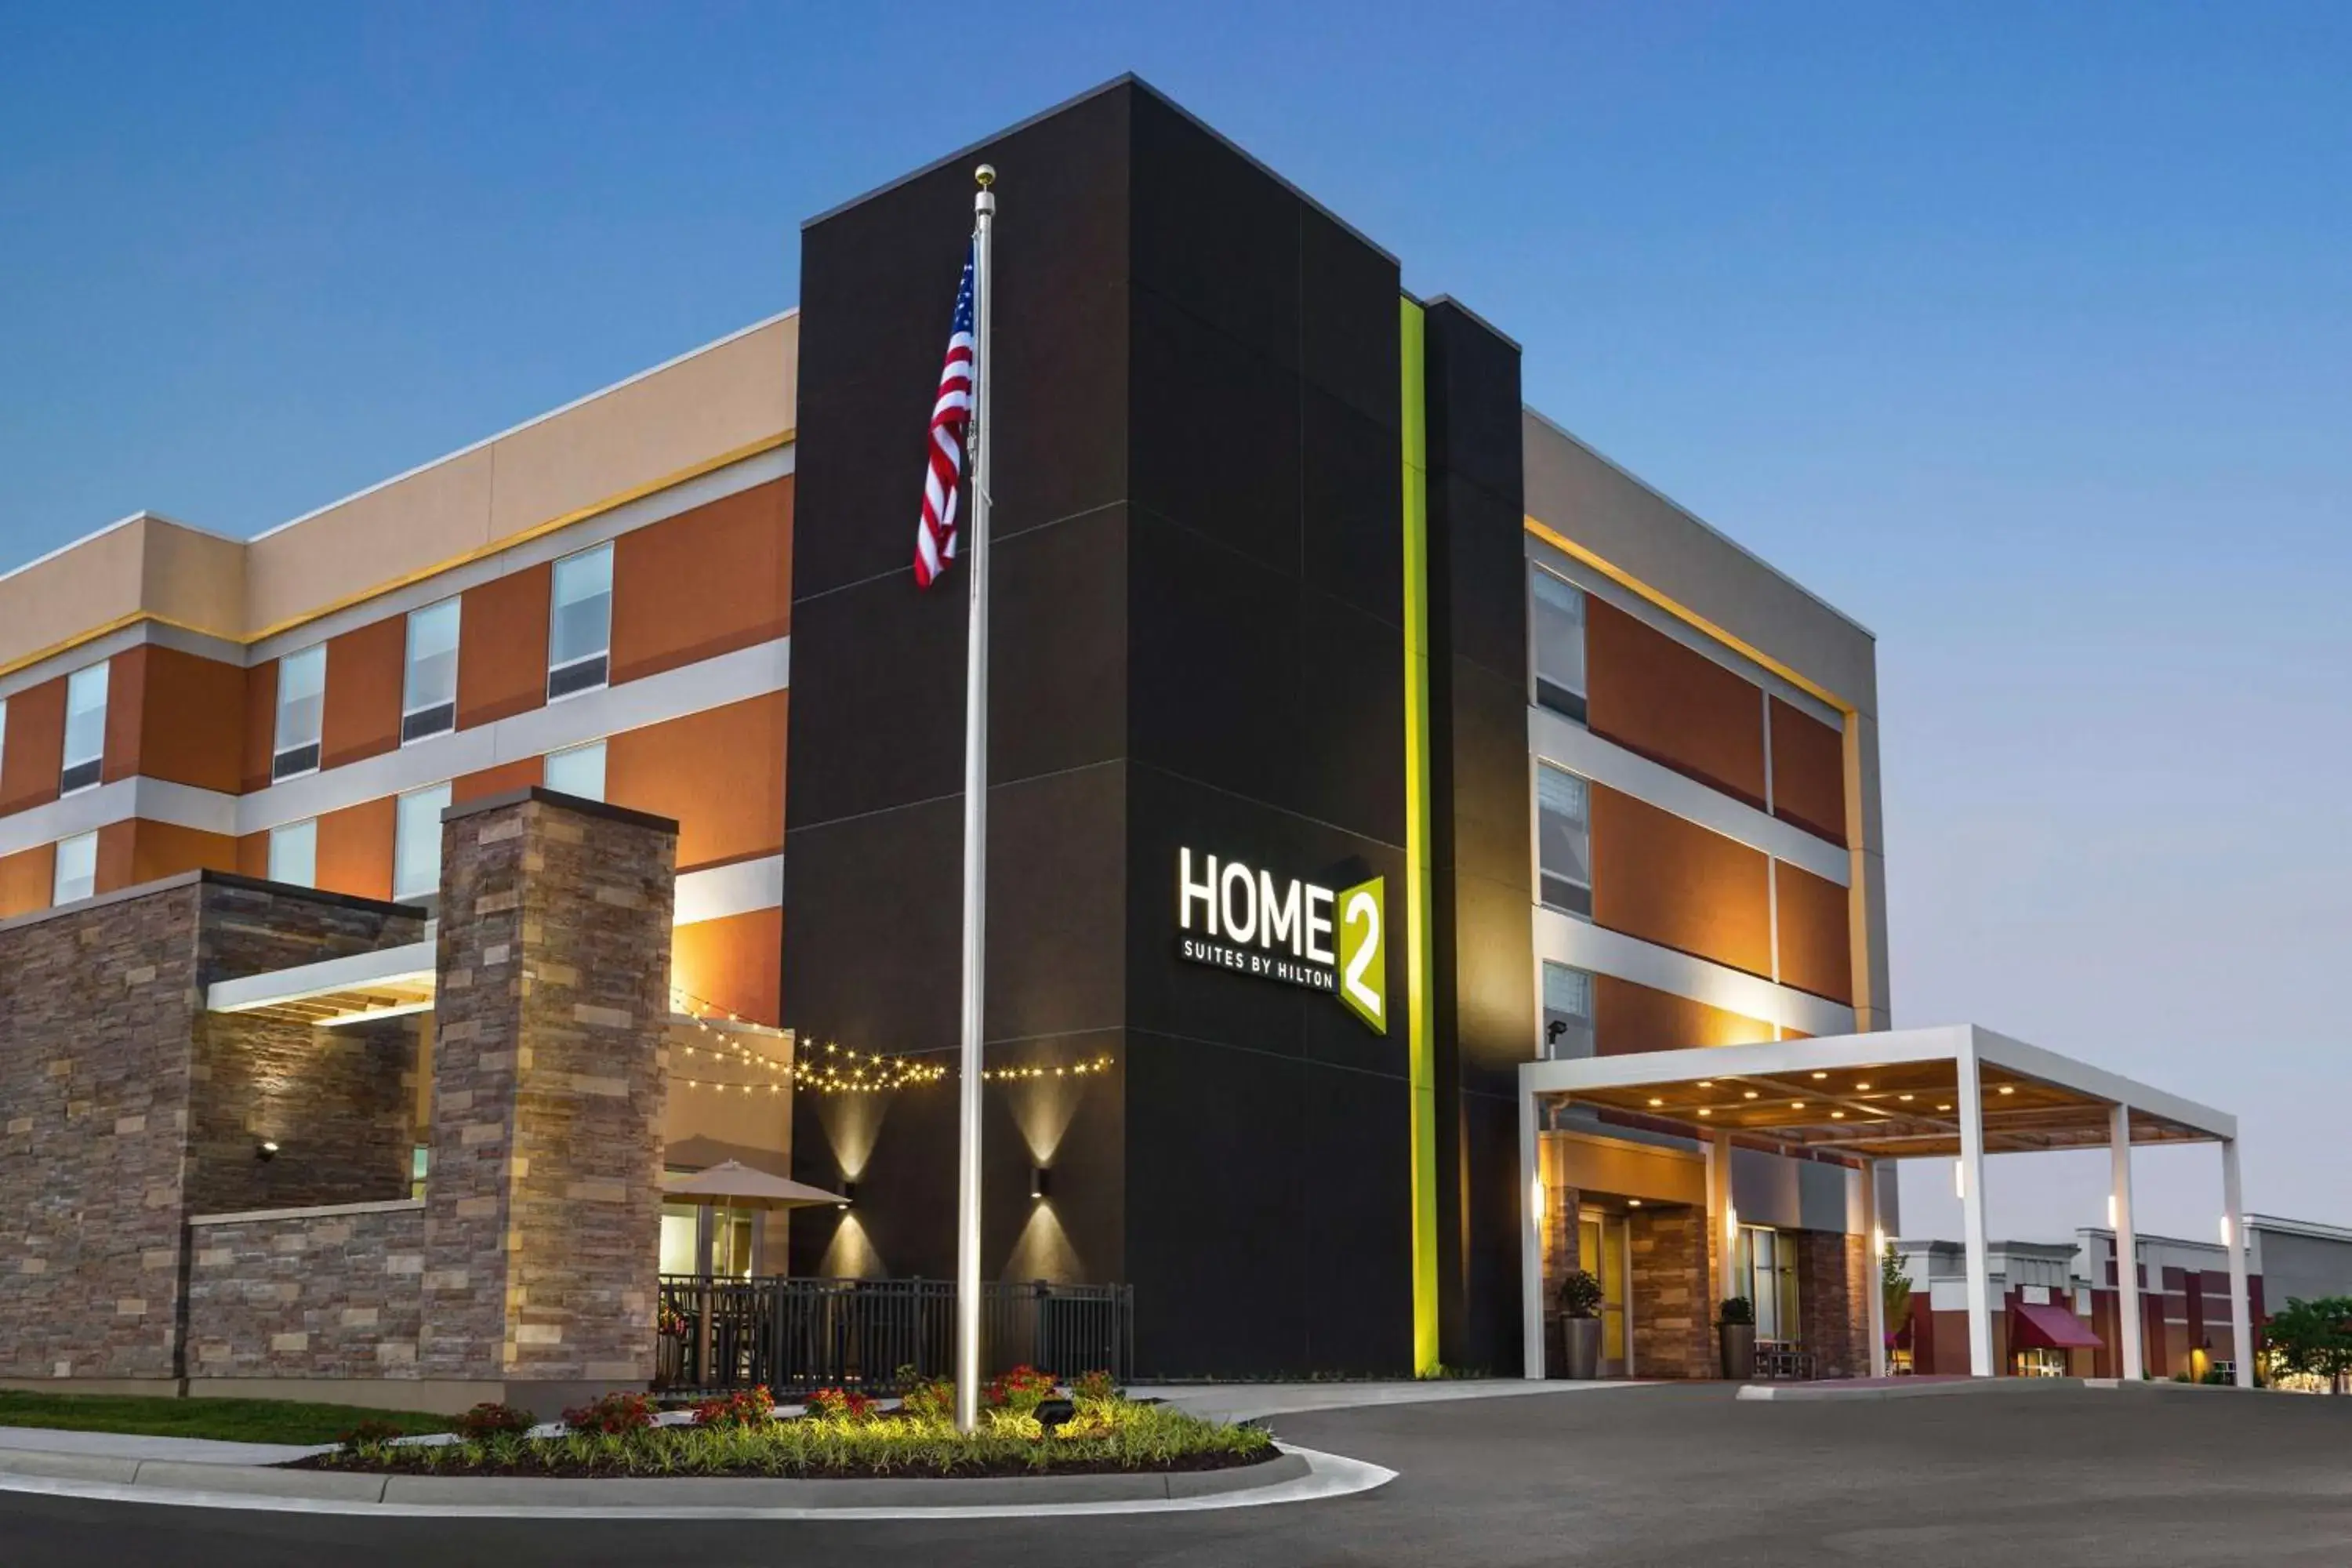 Property Building in Home2 Suites By Hilton Leesburg, Va